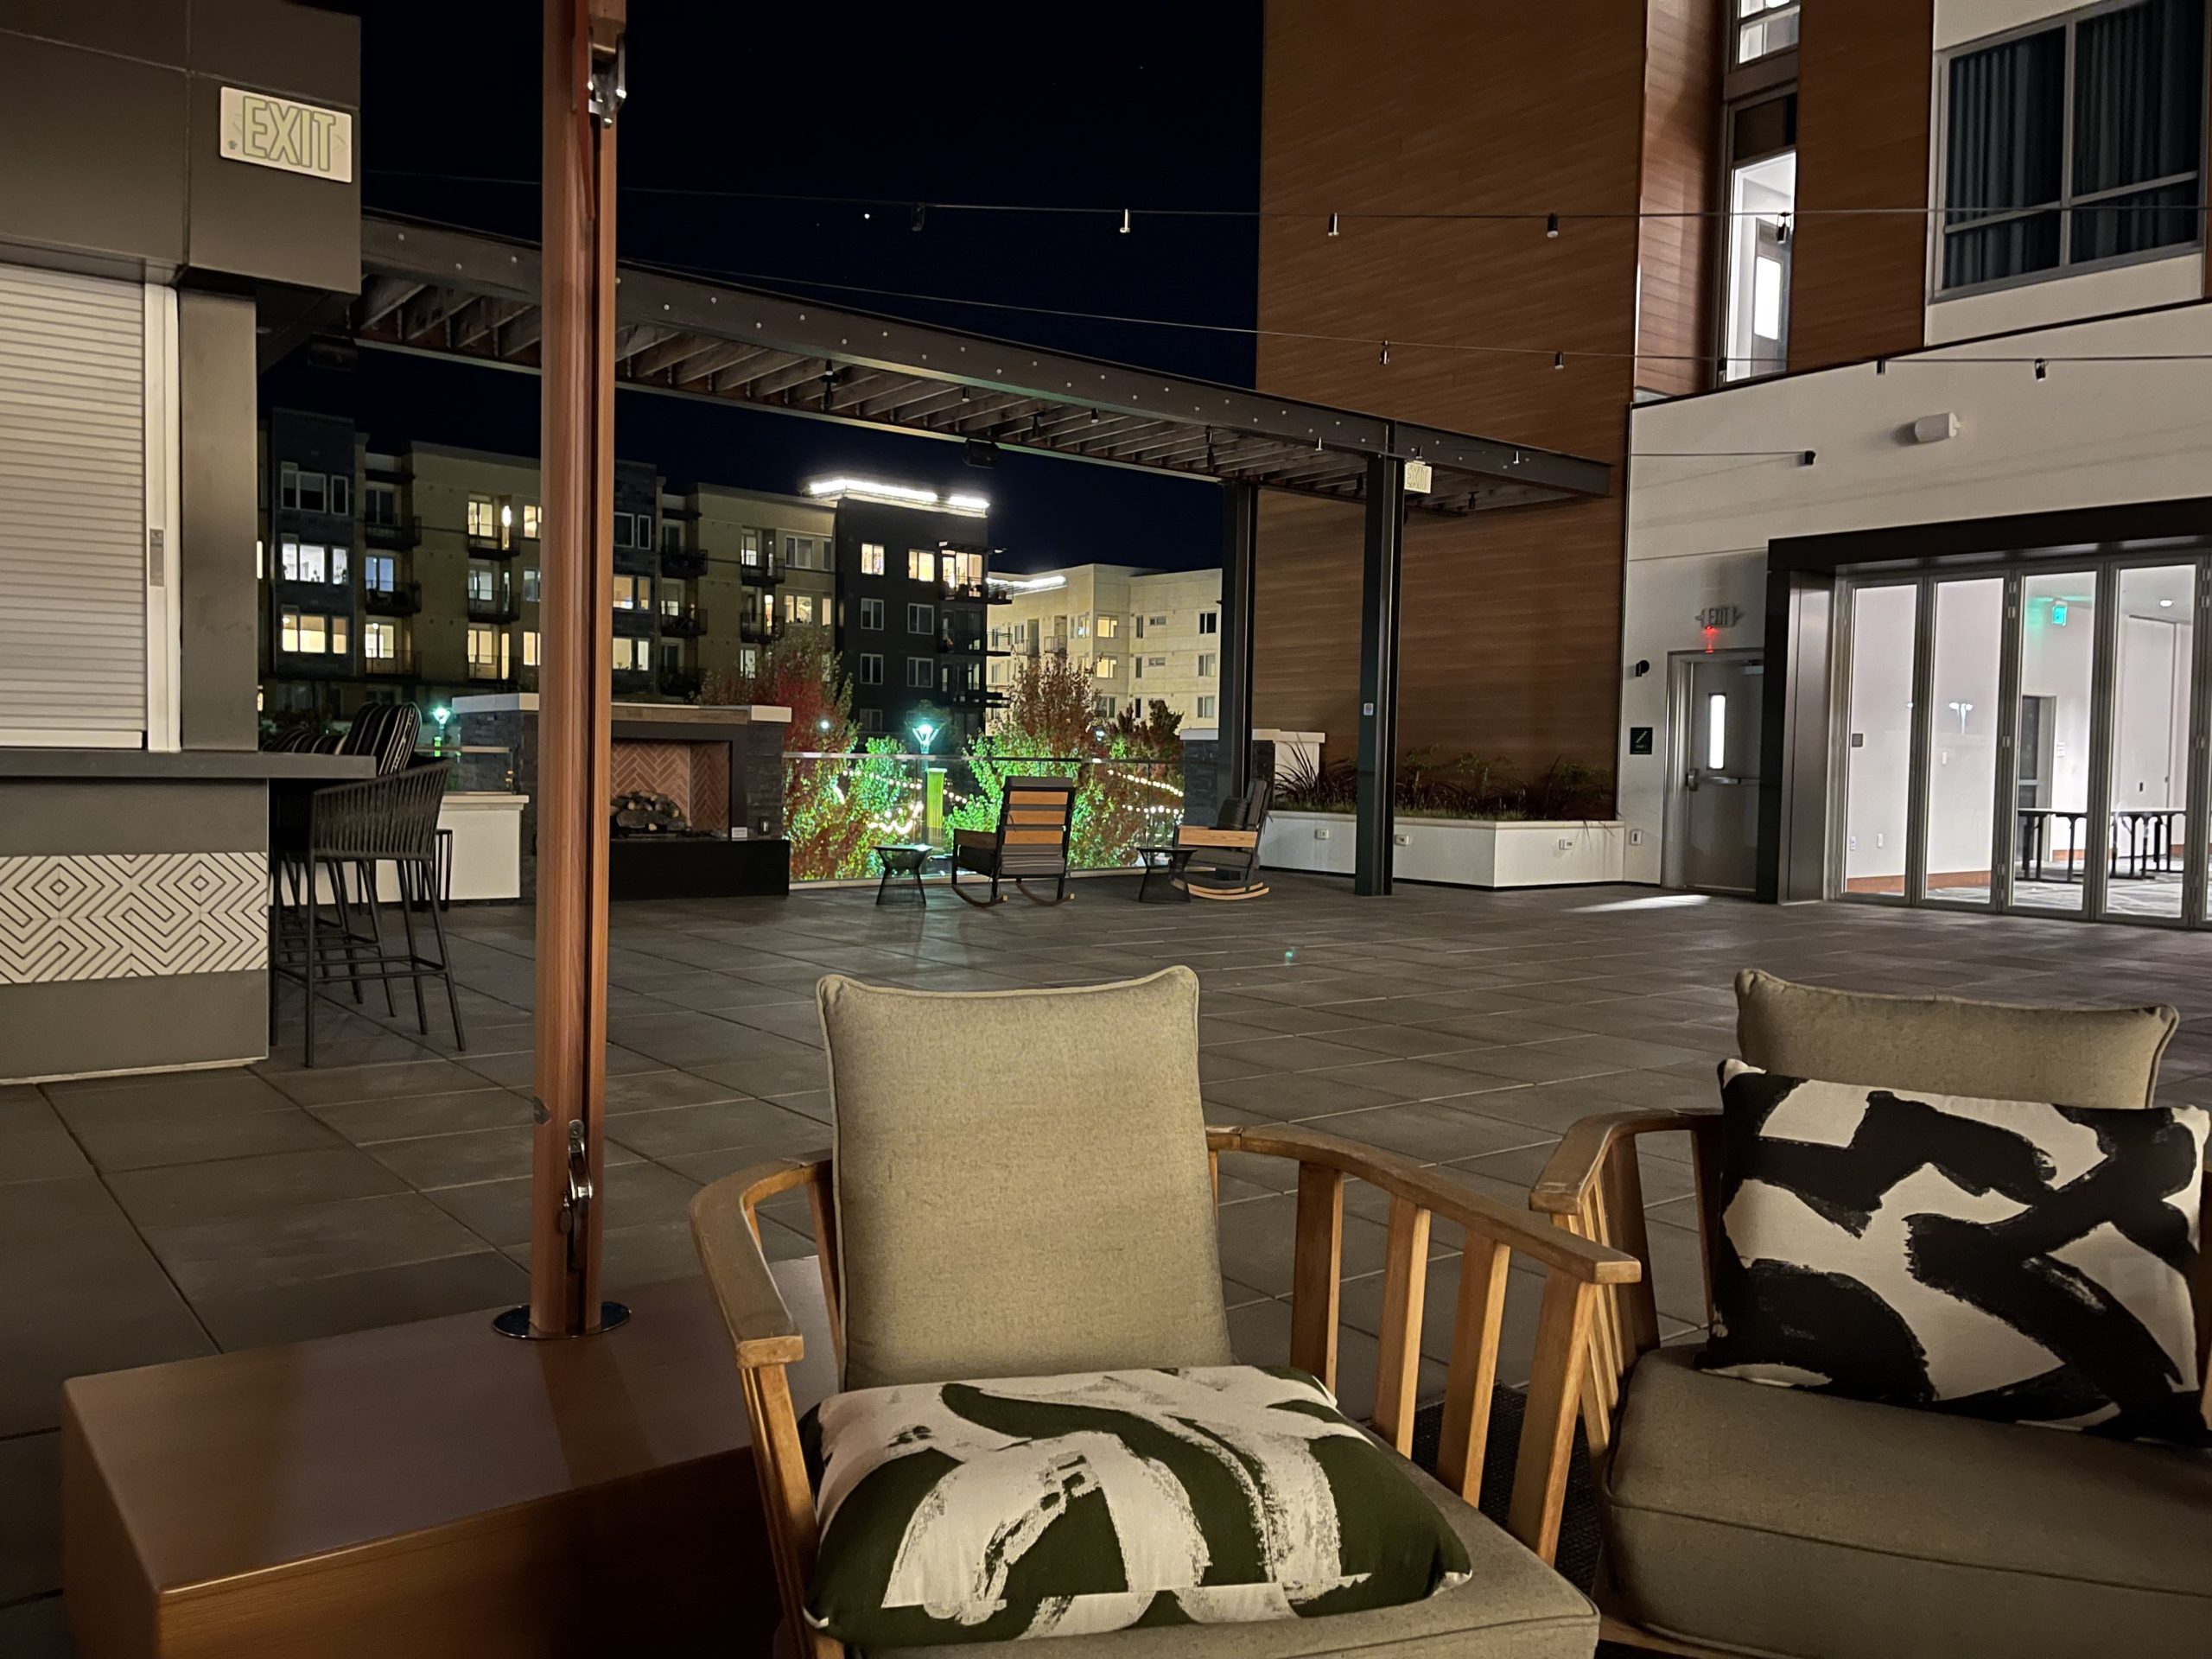 a patio with chairs and a building at night